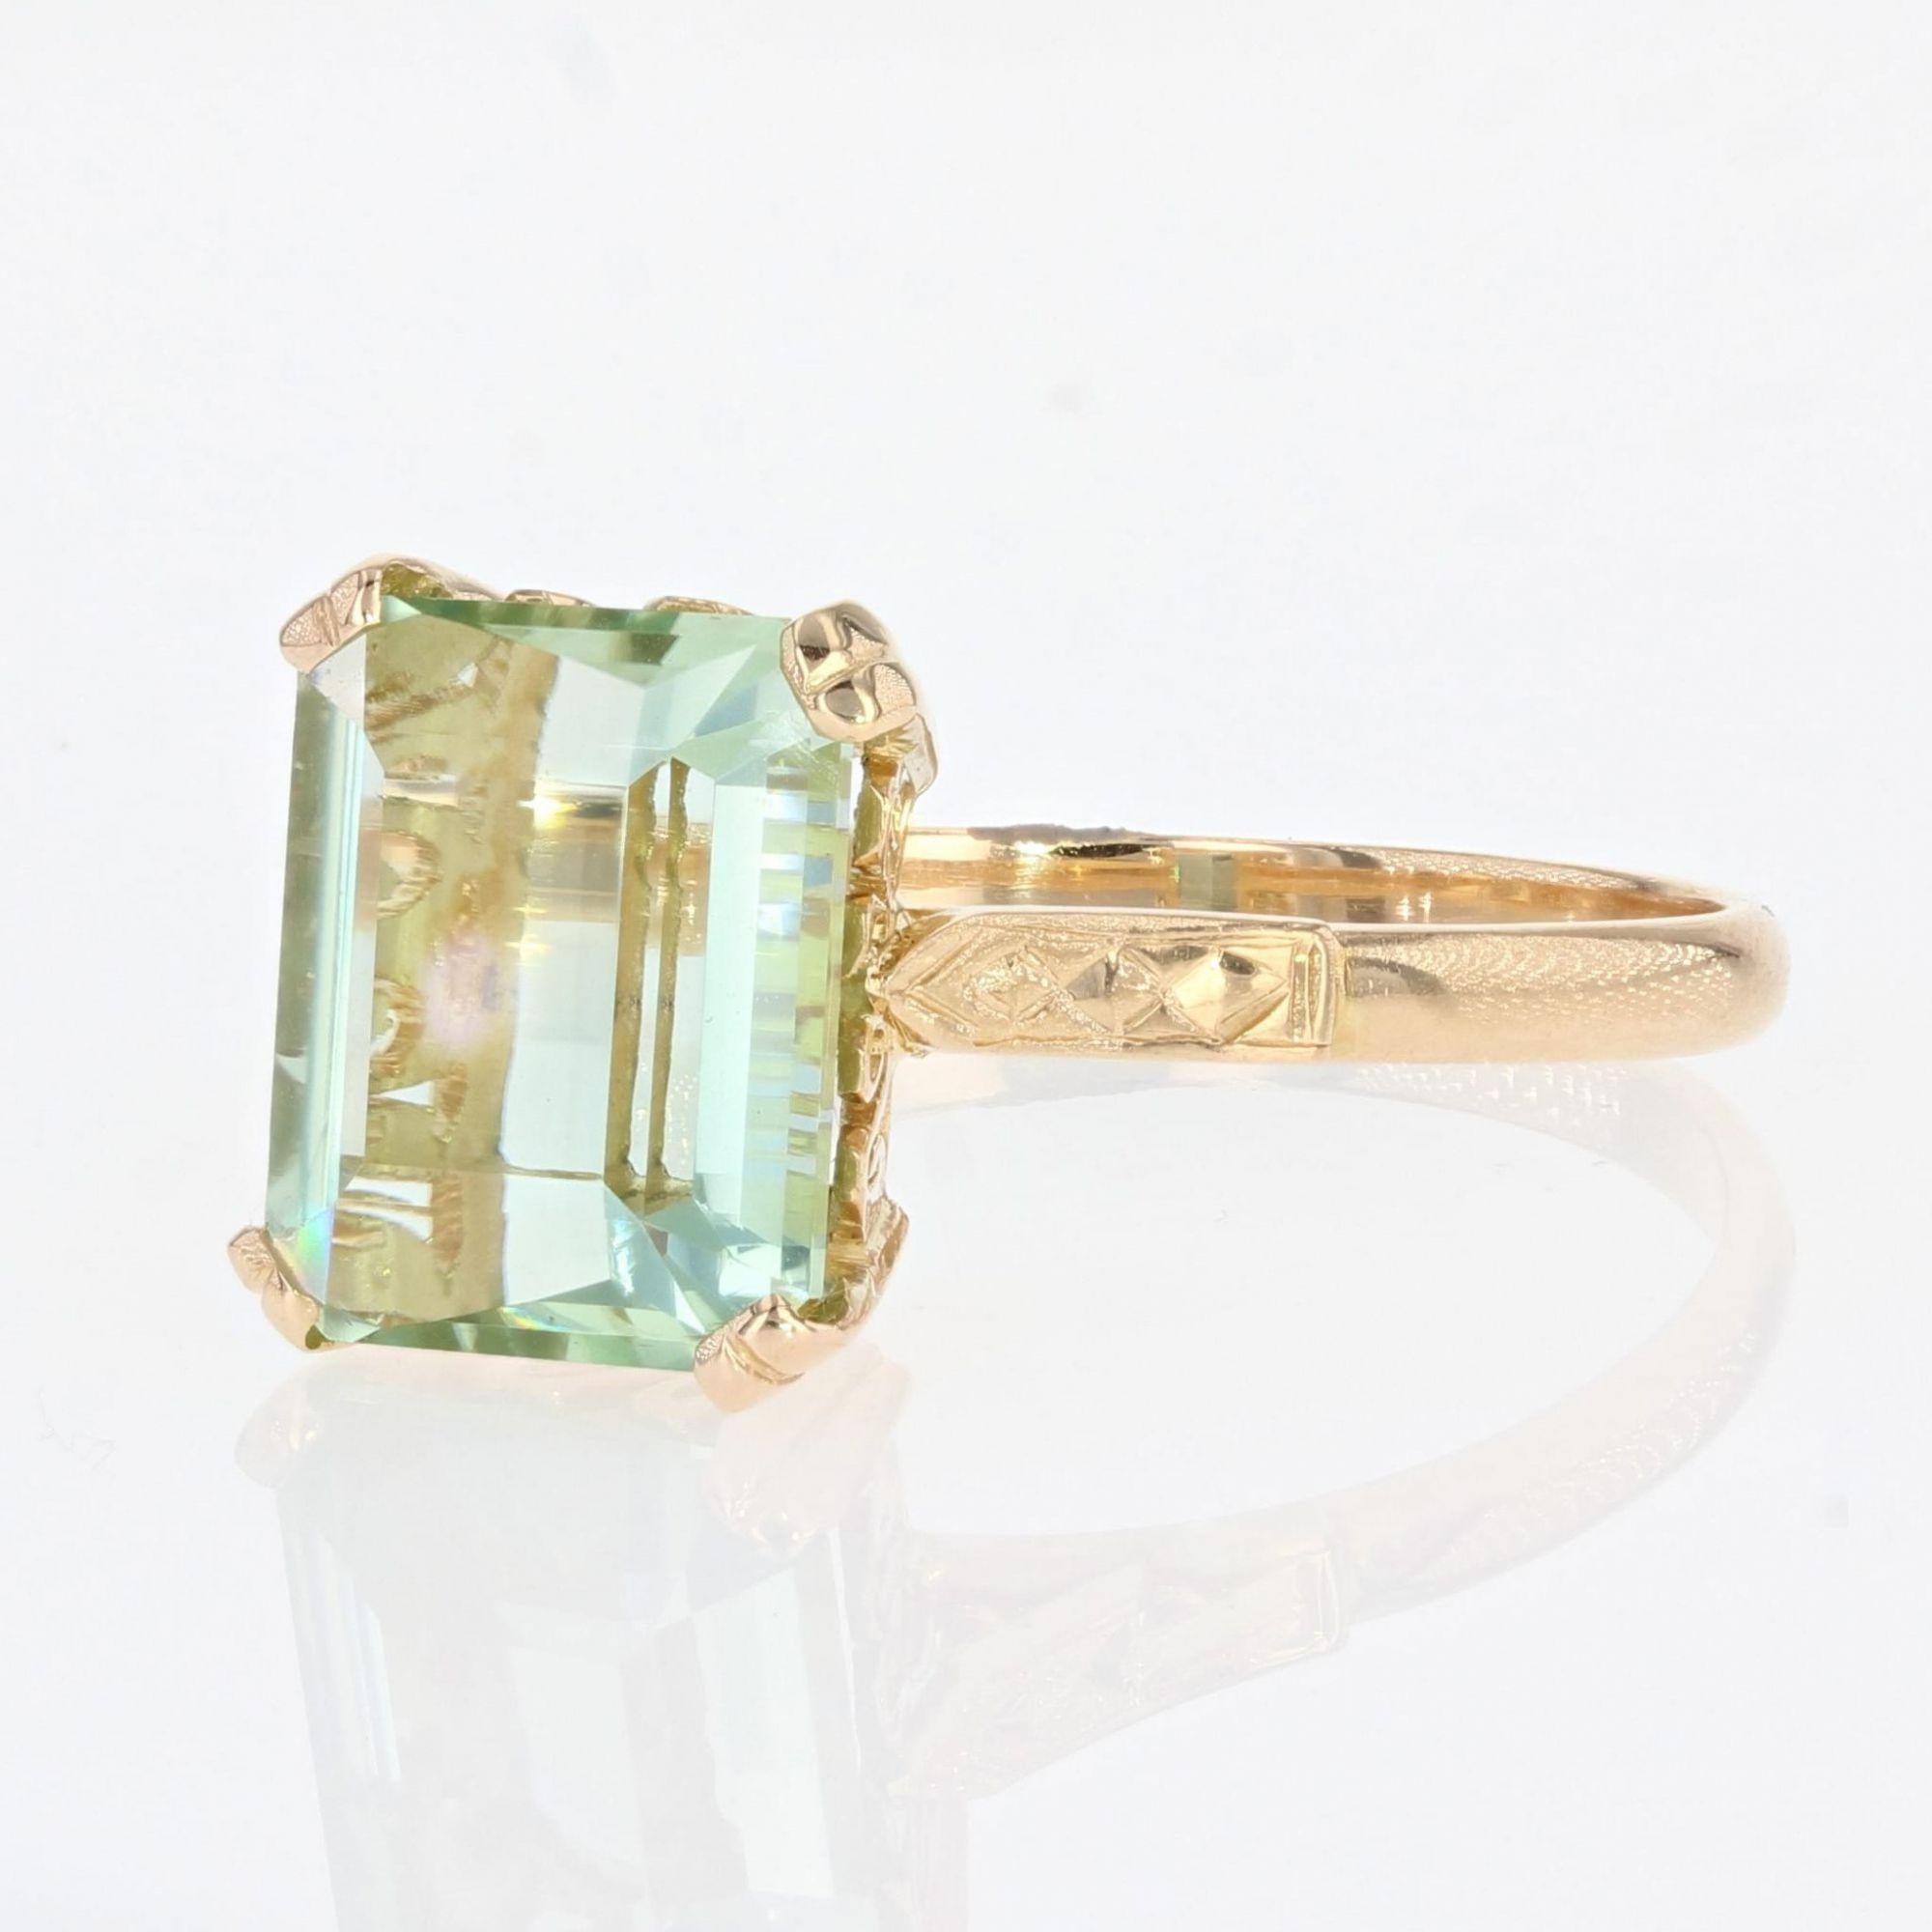 French 1960s 5.82 Carat Watermint Tourmaline 18 Karat Yellow Gold Ring For Sale 1